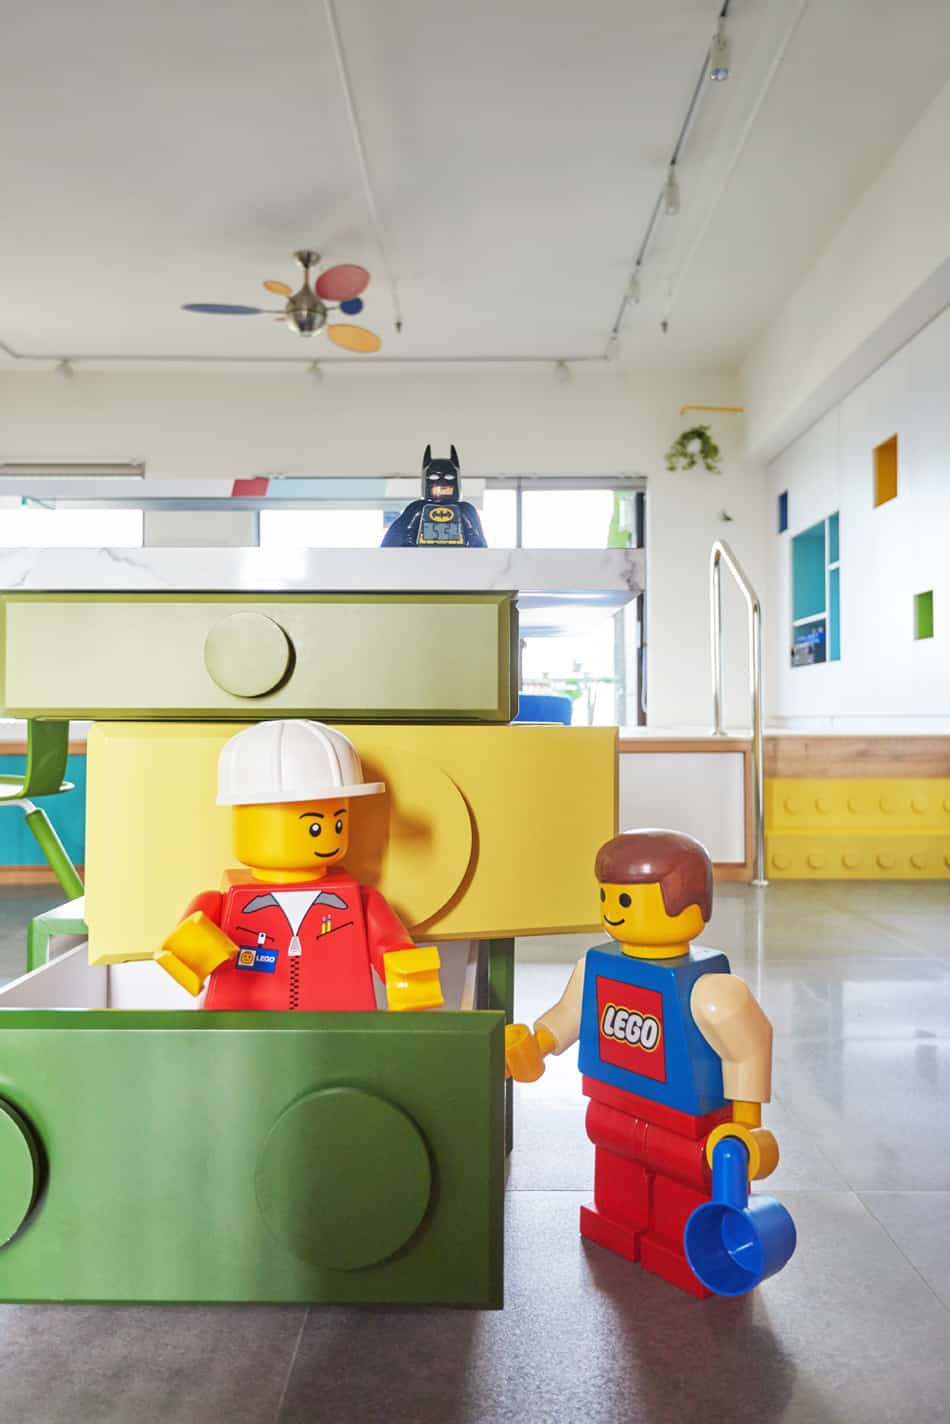 11-apartment-renovation-references-lego-modules-every-room.jpg